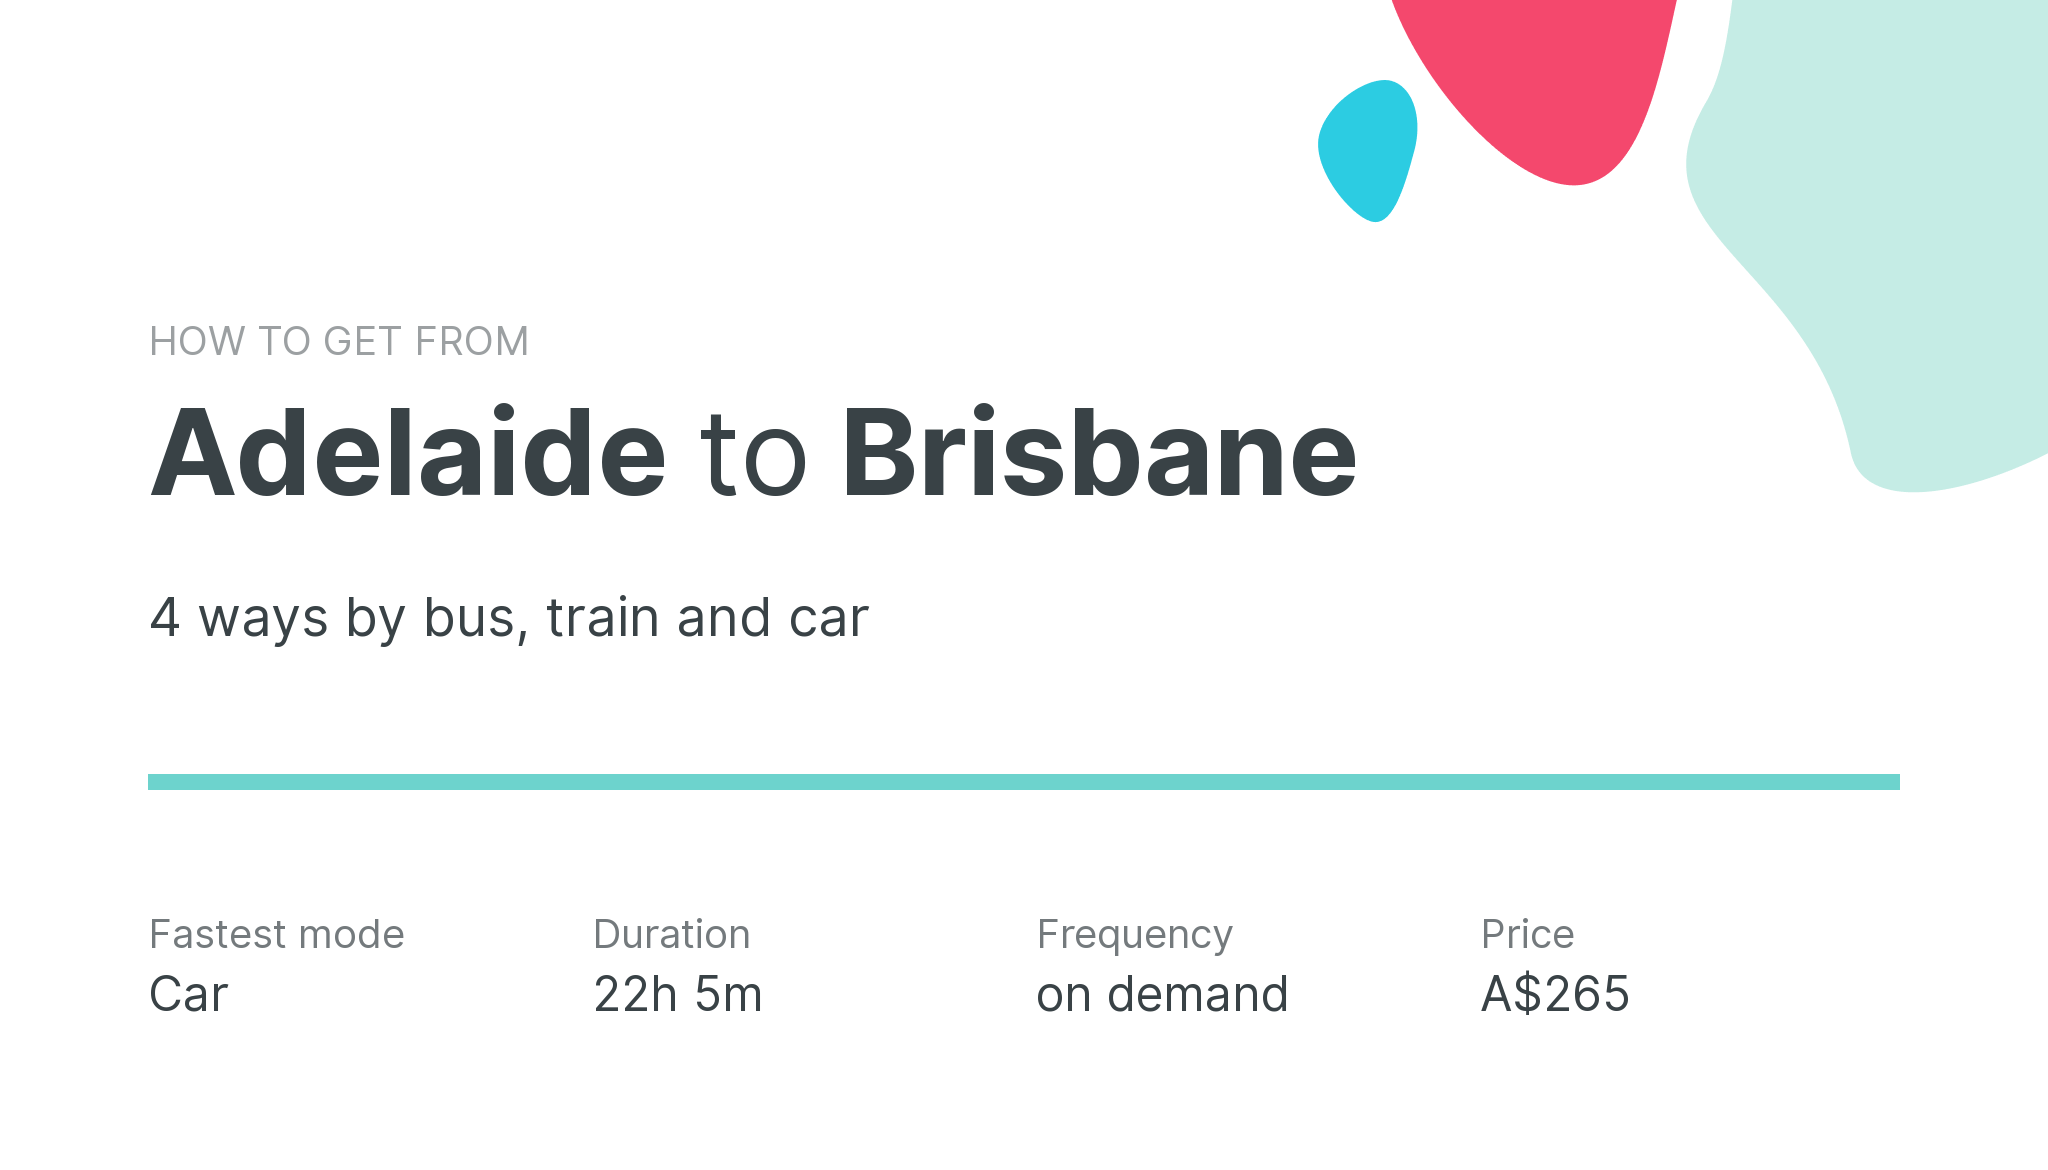 How do I get from Adelaide to Brisbane